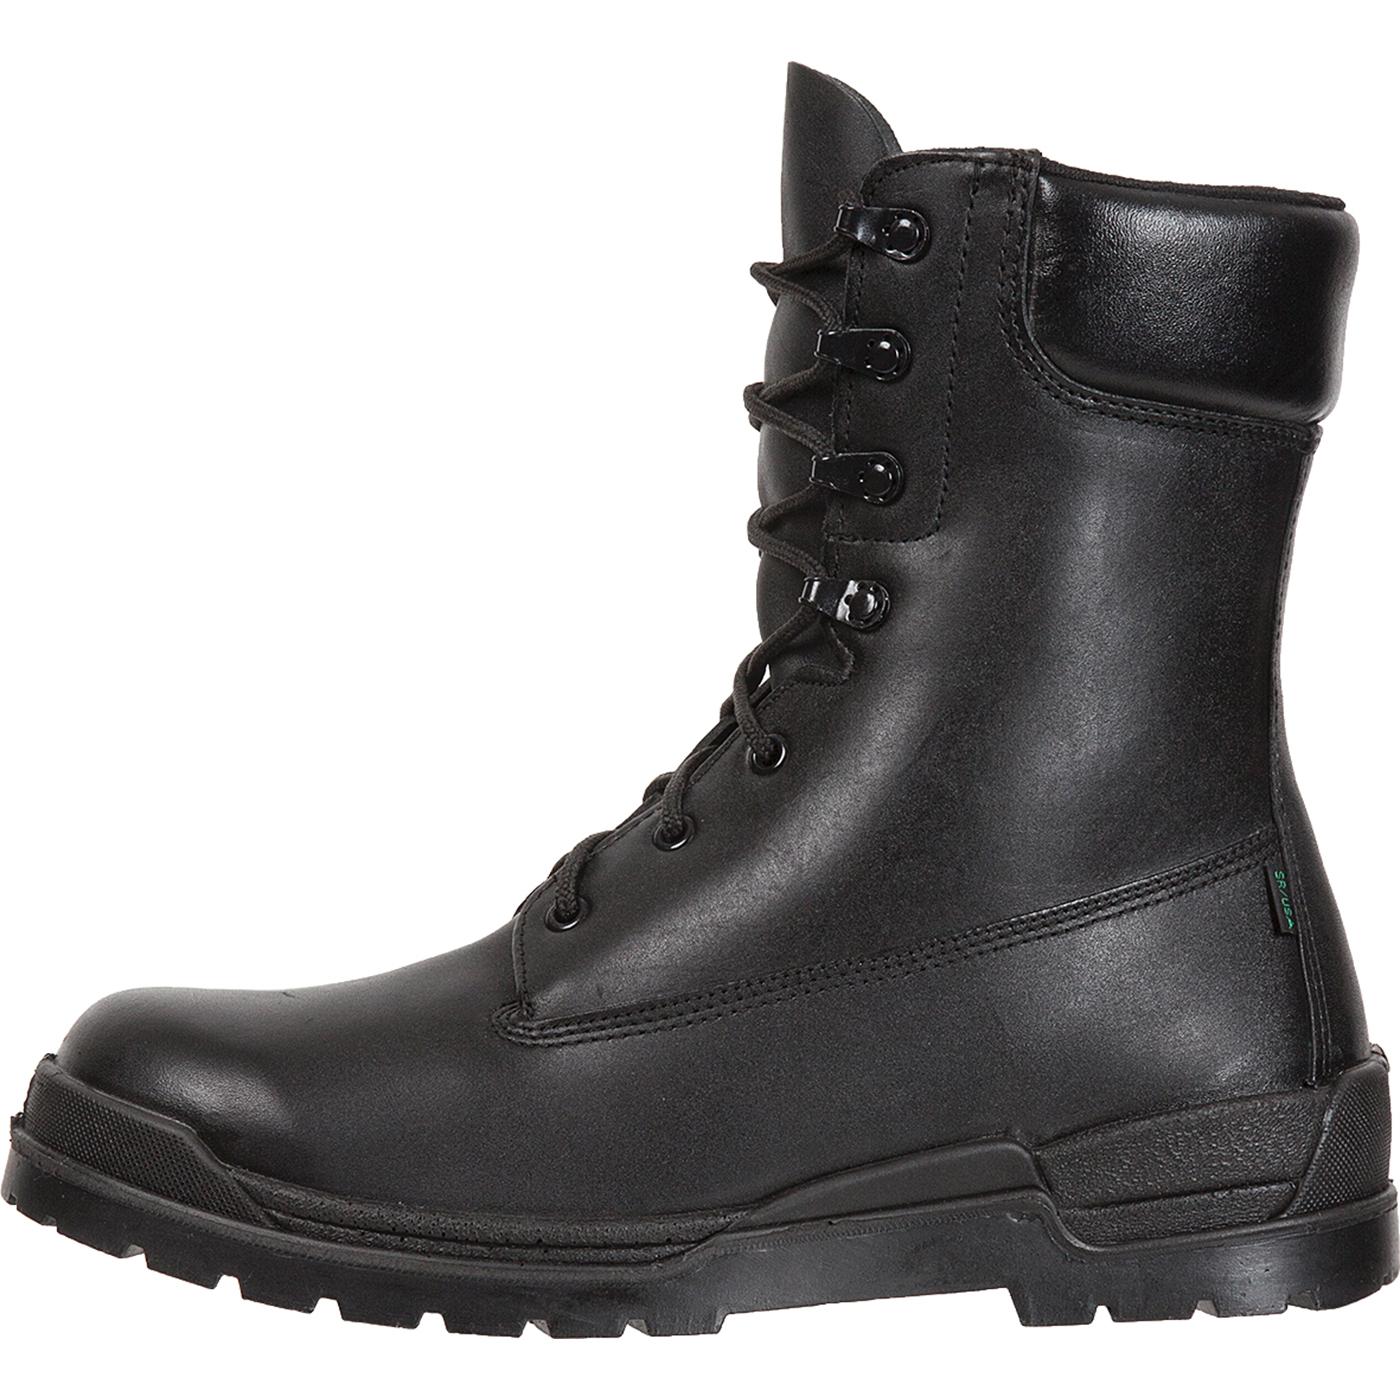 Rocky Insulated Duty Boot - Men's Postal-Approved Footwear, #1950-1